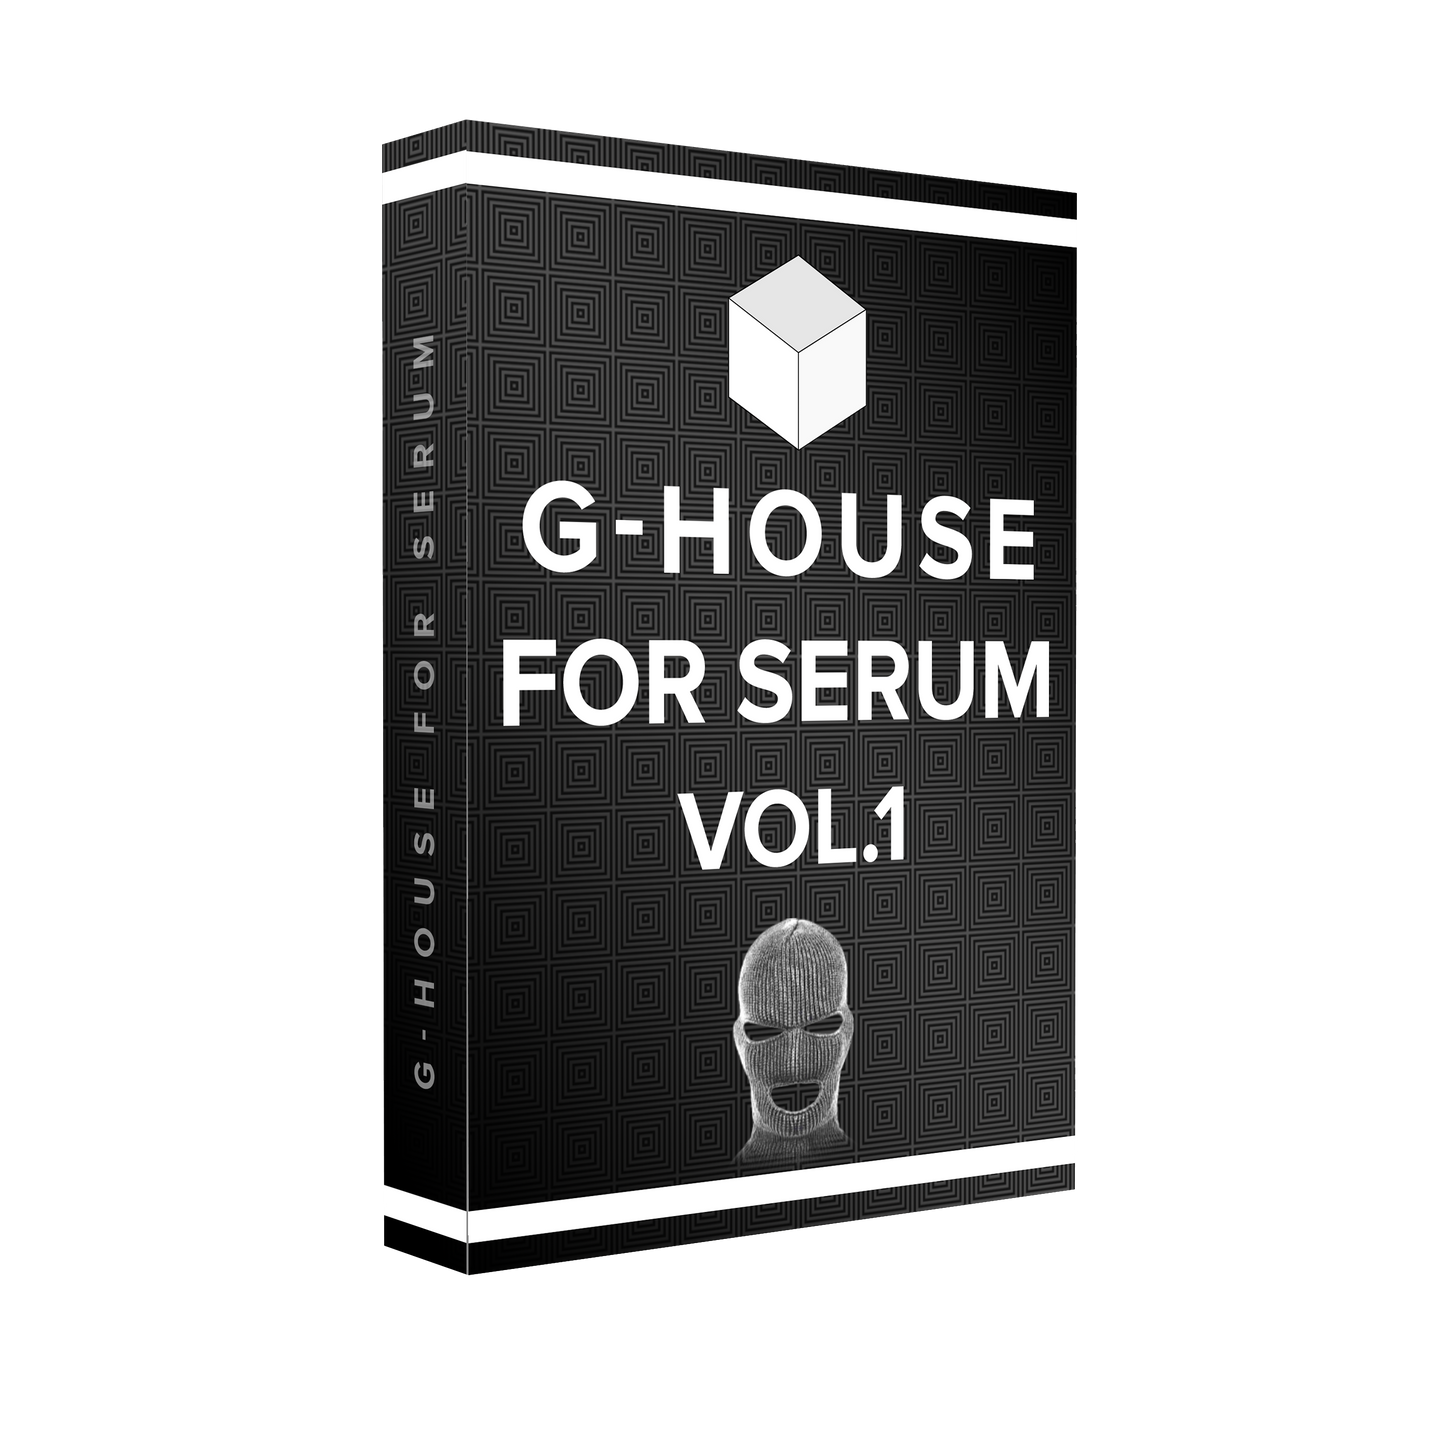 G-House for Serum Vol.1